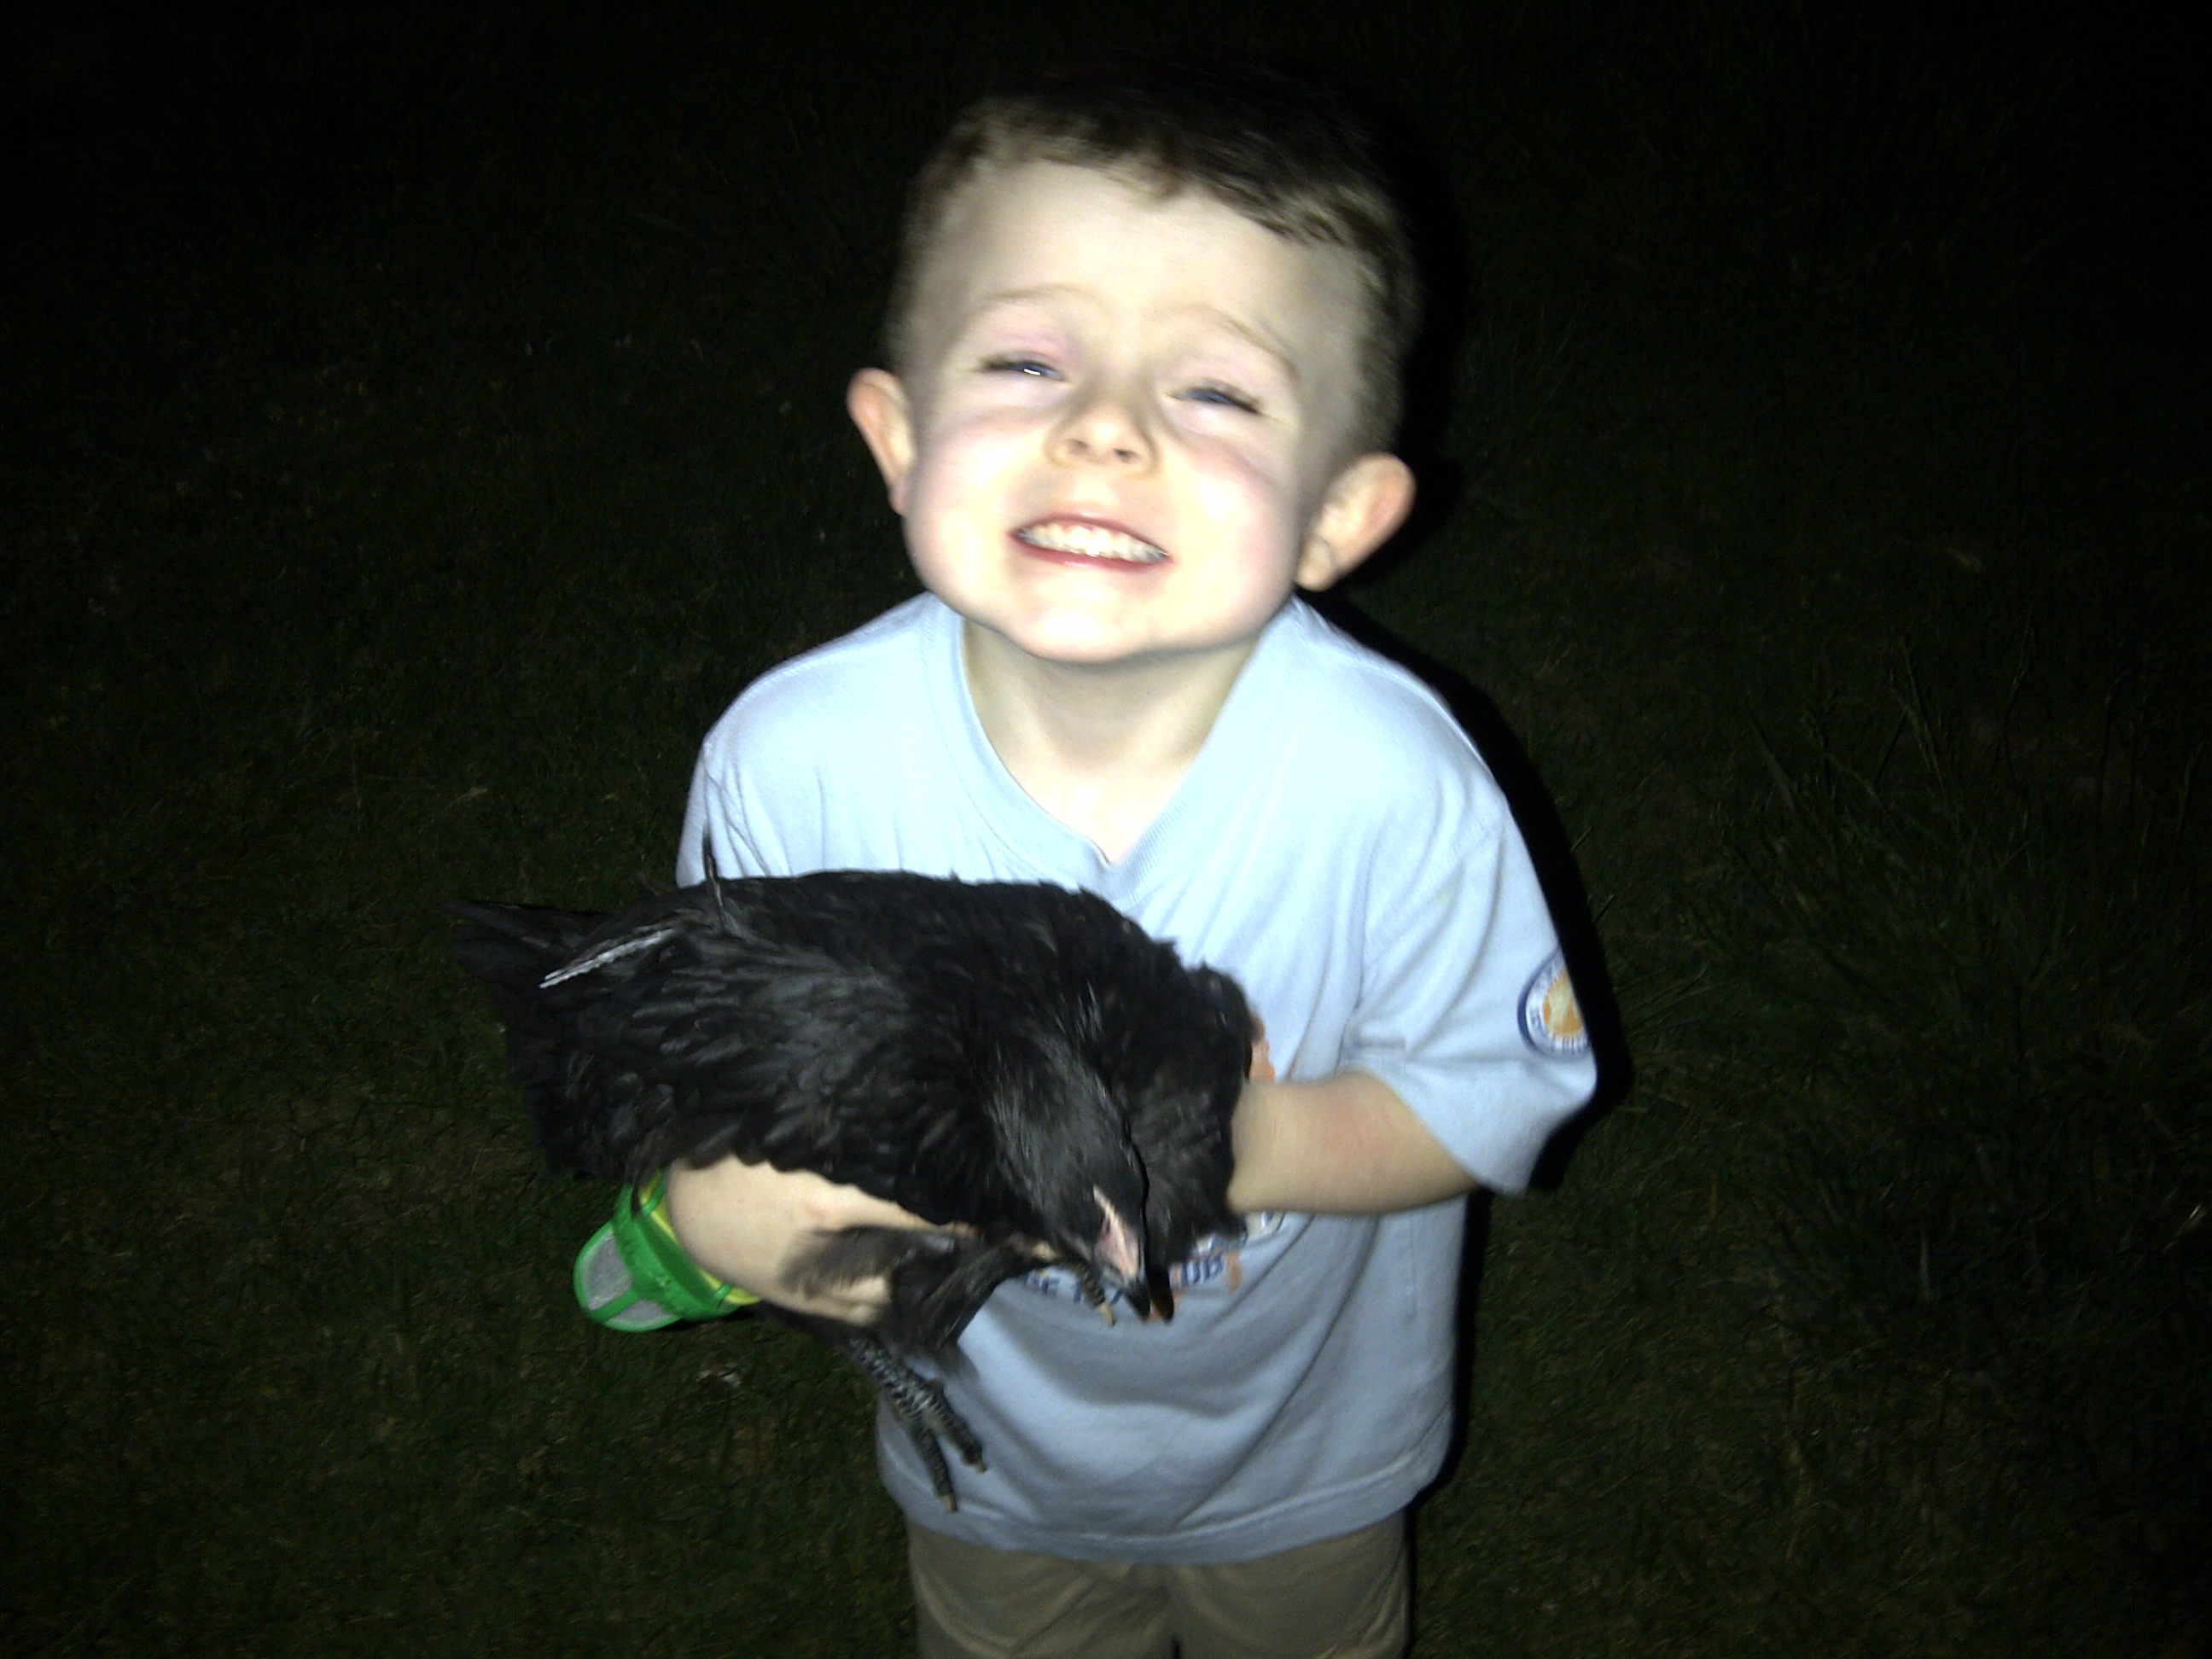 My son helping me move the little hens to the main coop. Don't worry, I have an area blocked off so the older birds can get used to the little birds. Here he is holding Sage a 9 week old Black Australorp hen.